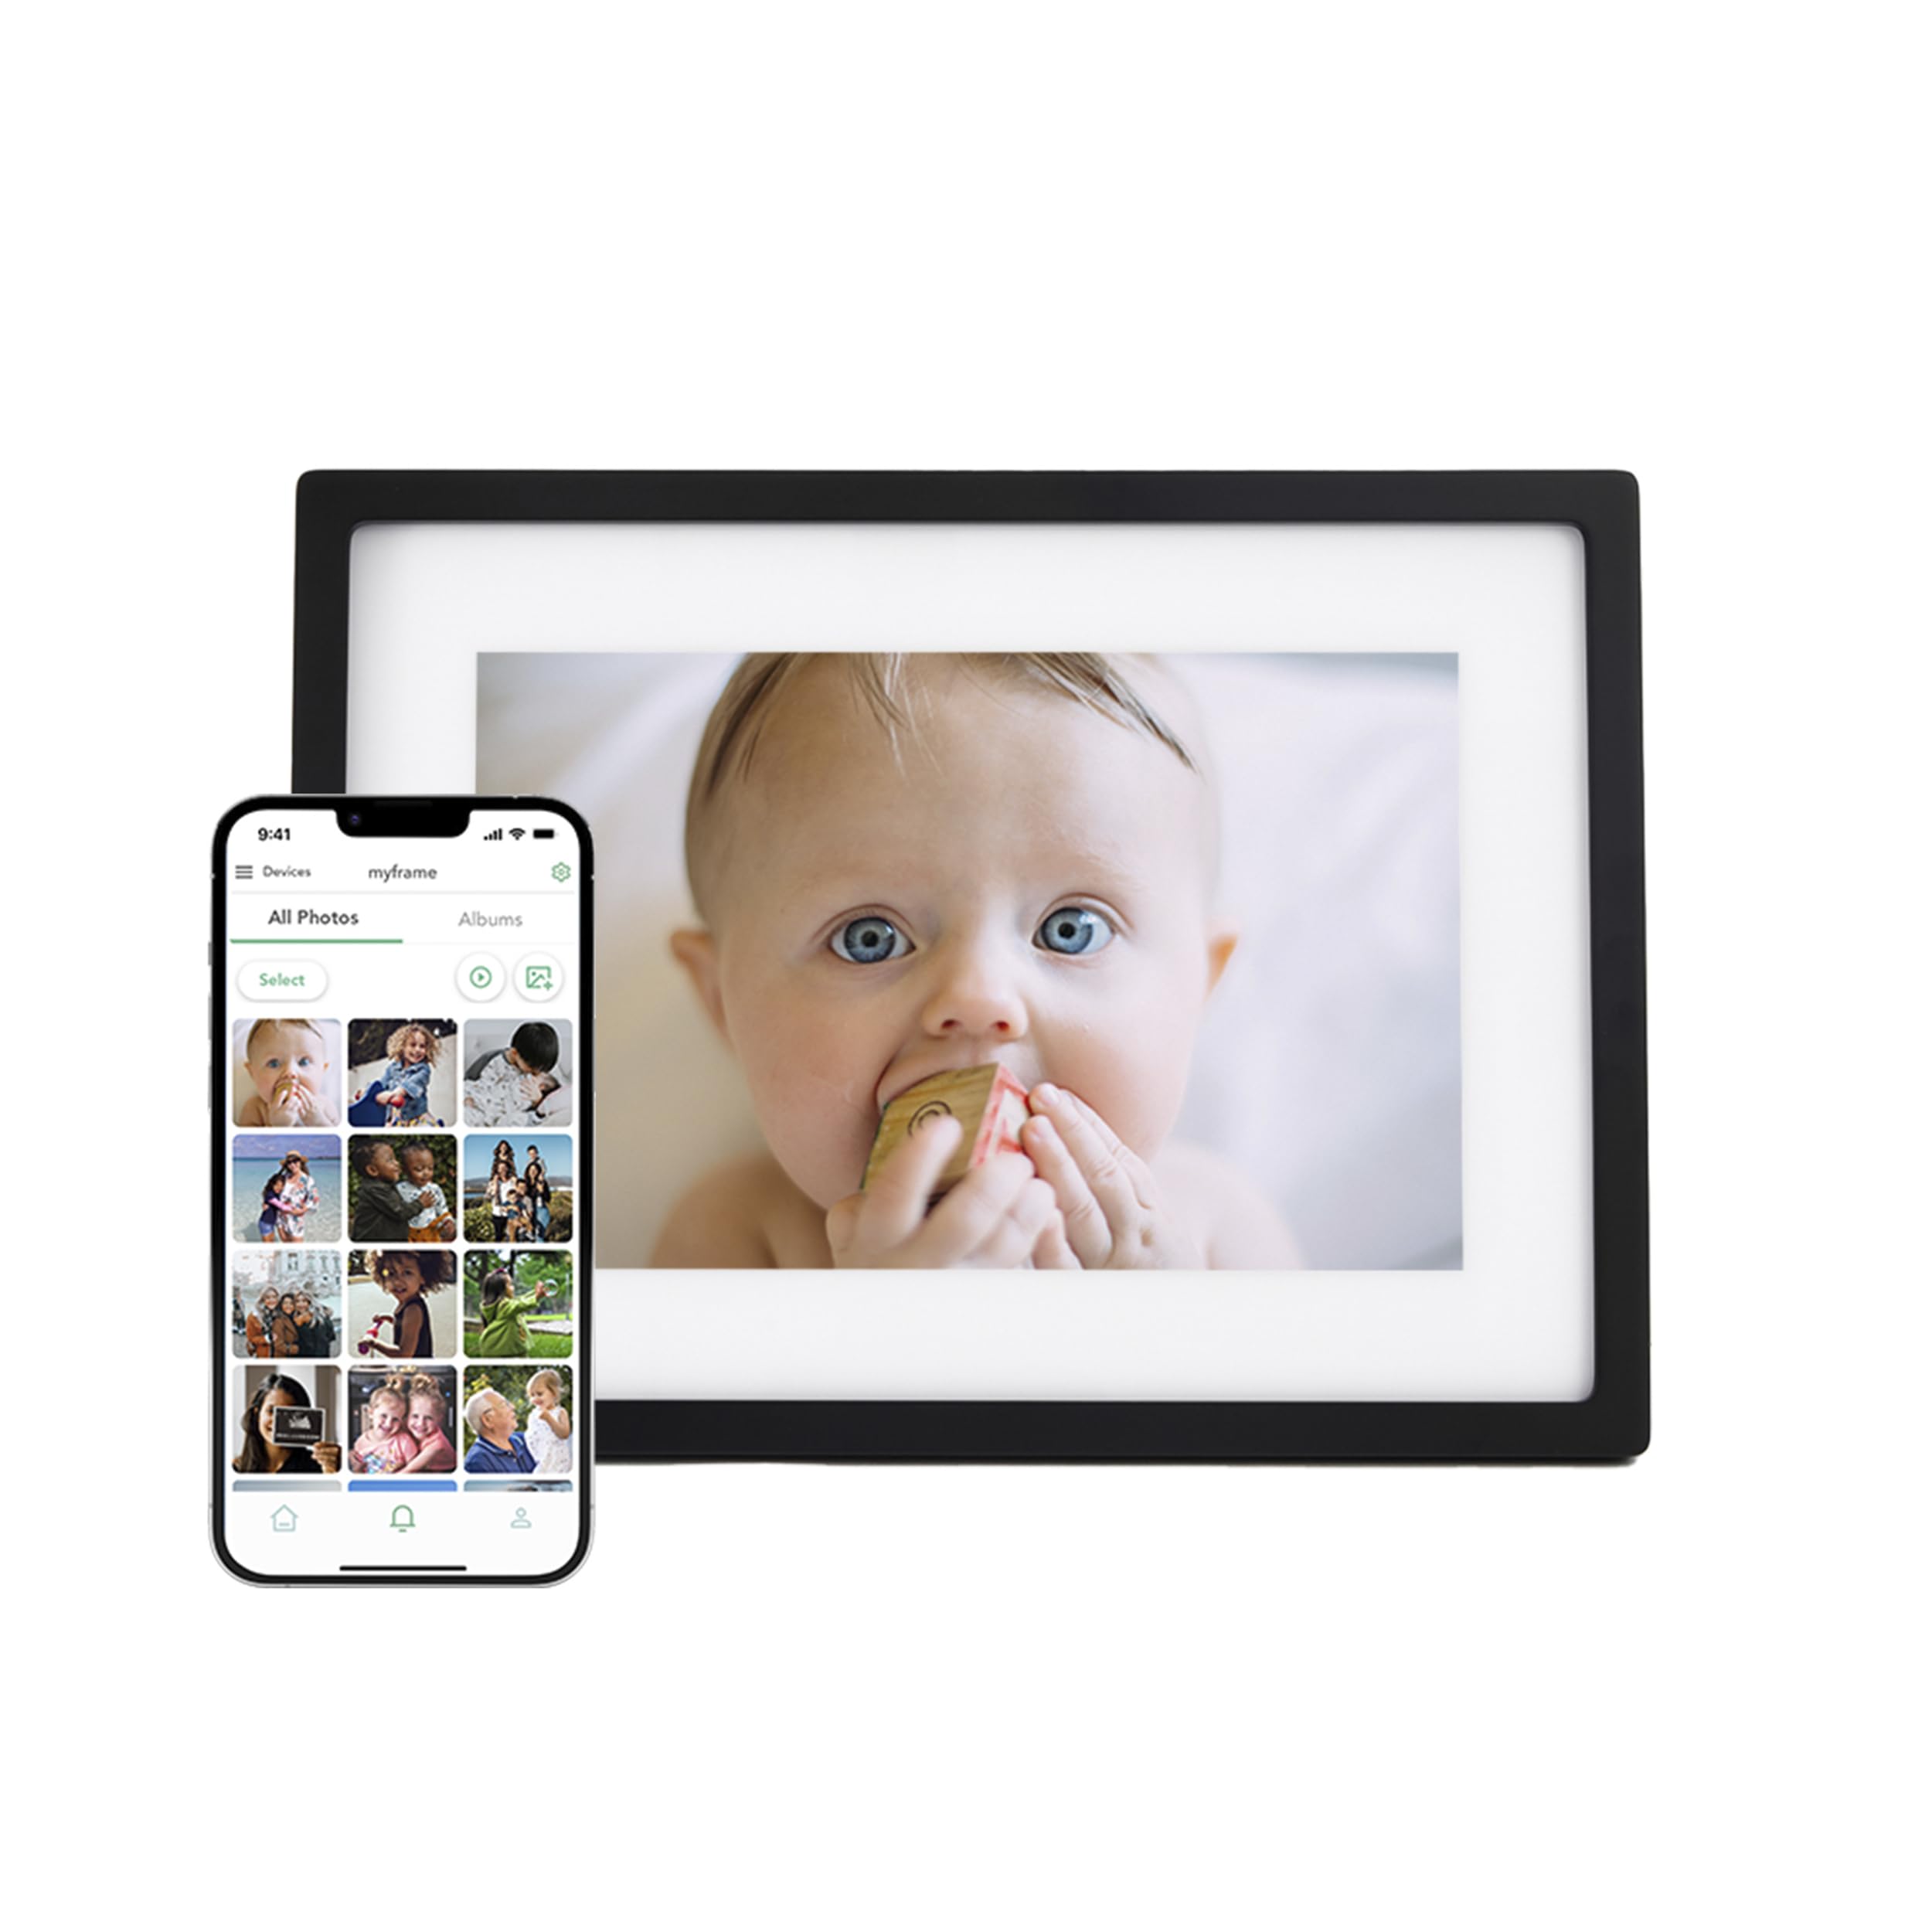 Skylight Frame: 10 inch WiFi Digital Picture Frame with Load from Phone Capability, Touch Screen Digital Photo Frame Display - Gift for Friends and Family